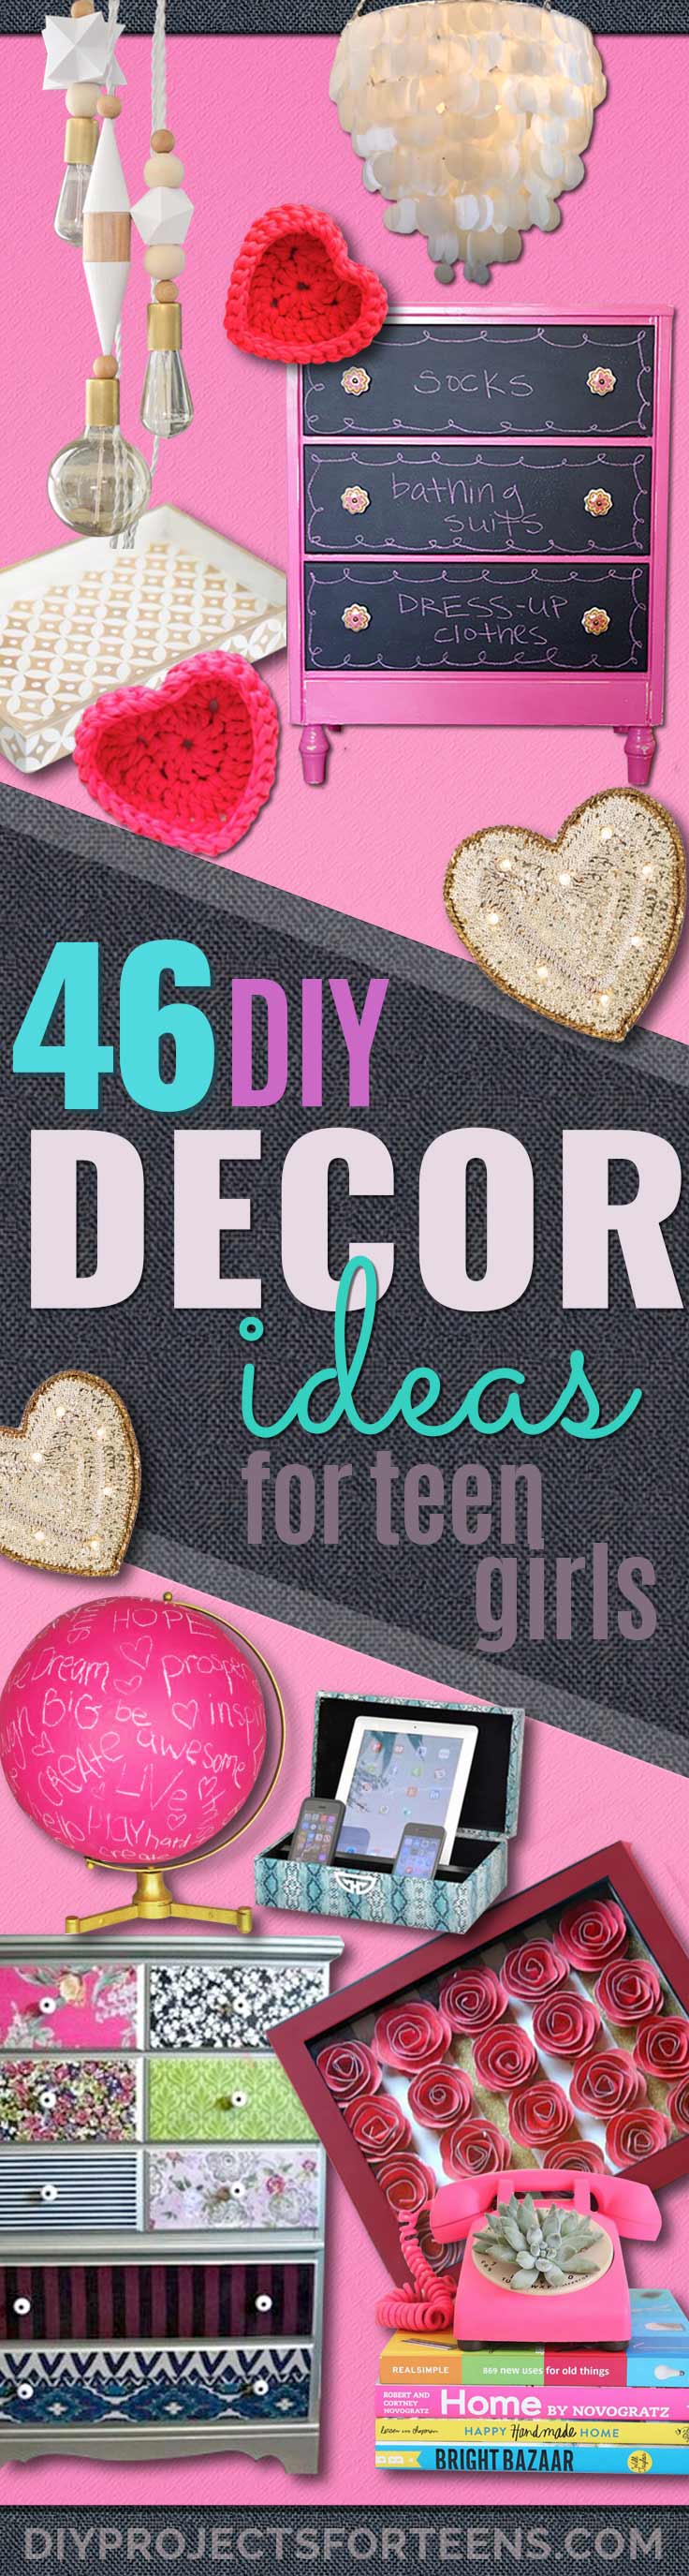 DIY Teen Room Decor Ideas for Girls | Fun Crafts and Decor For Tweens | Cool Bedroom Decor, Wall Art & Signs, Crafts, Bedding, Fun Do It Yourself Projects and Room Ideas for Small Spaces 